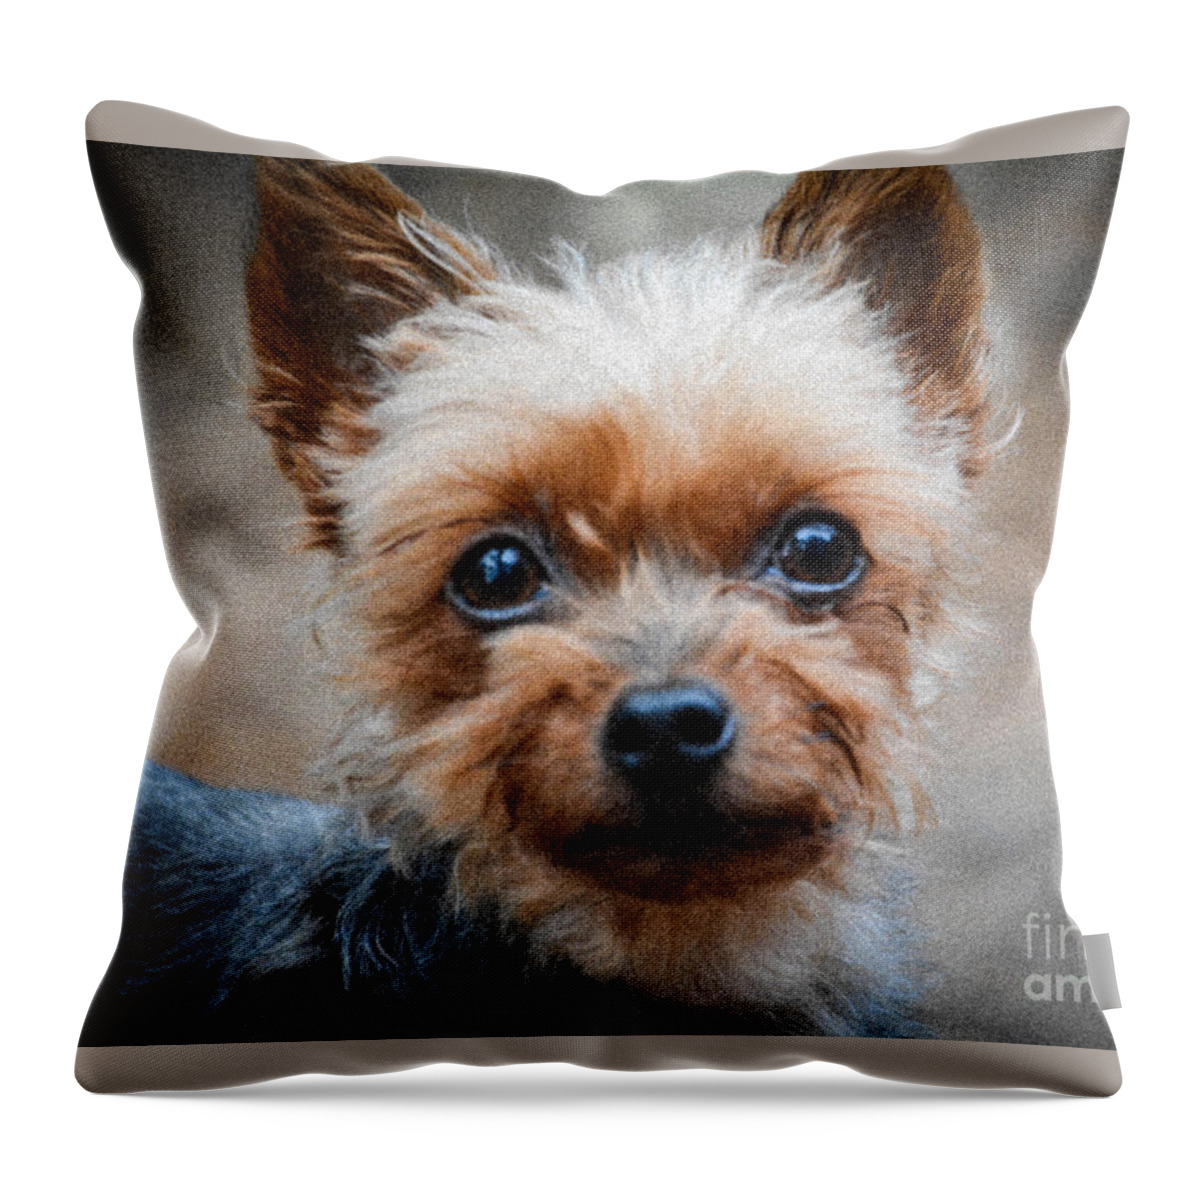 Sad Throw Pillow featuring the photograph Don't Leave by Lisa Kilby